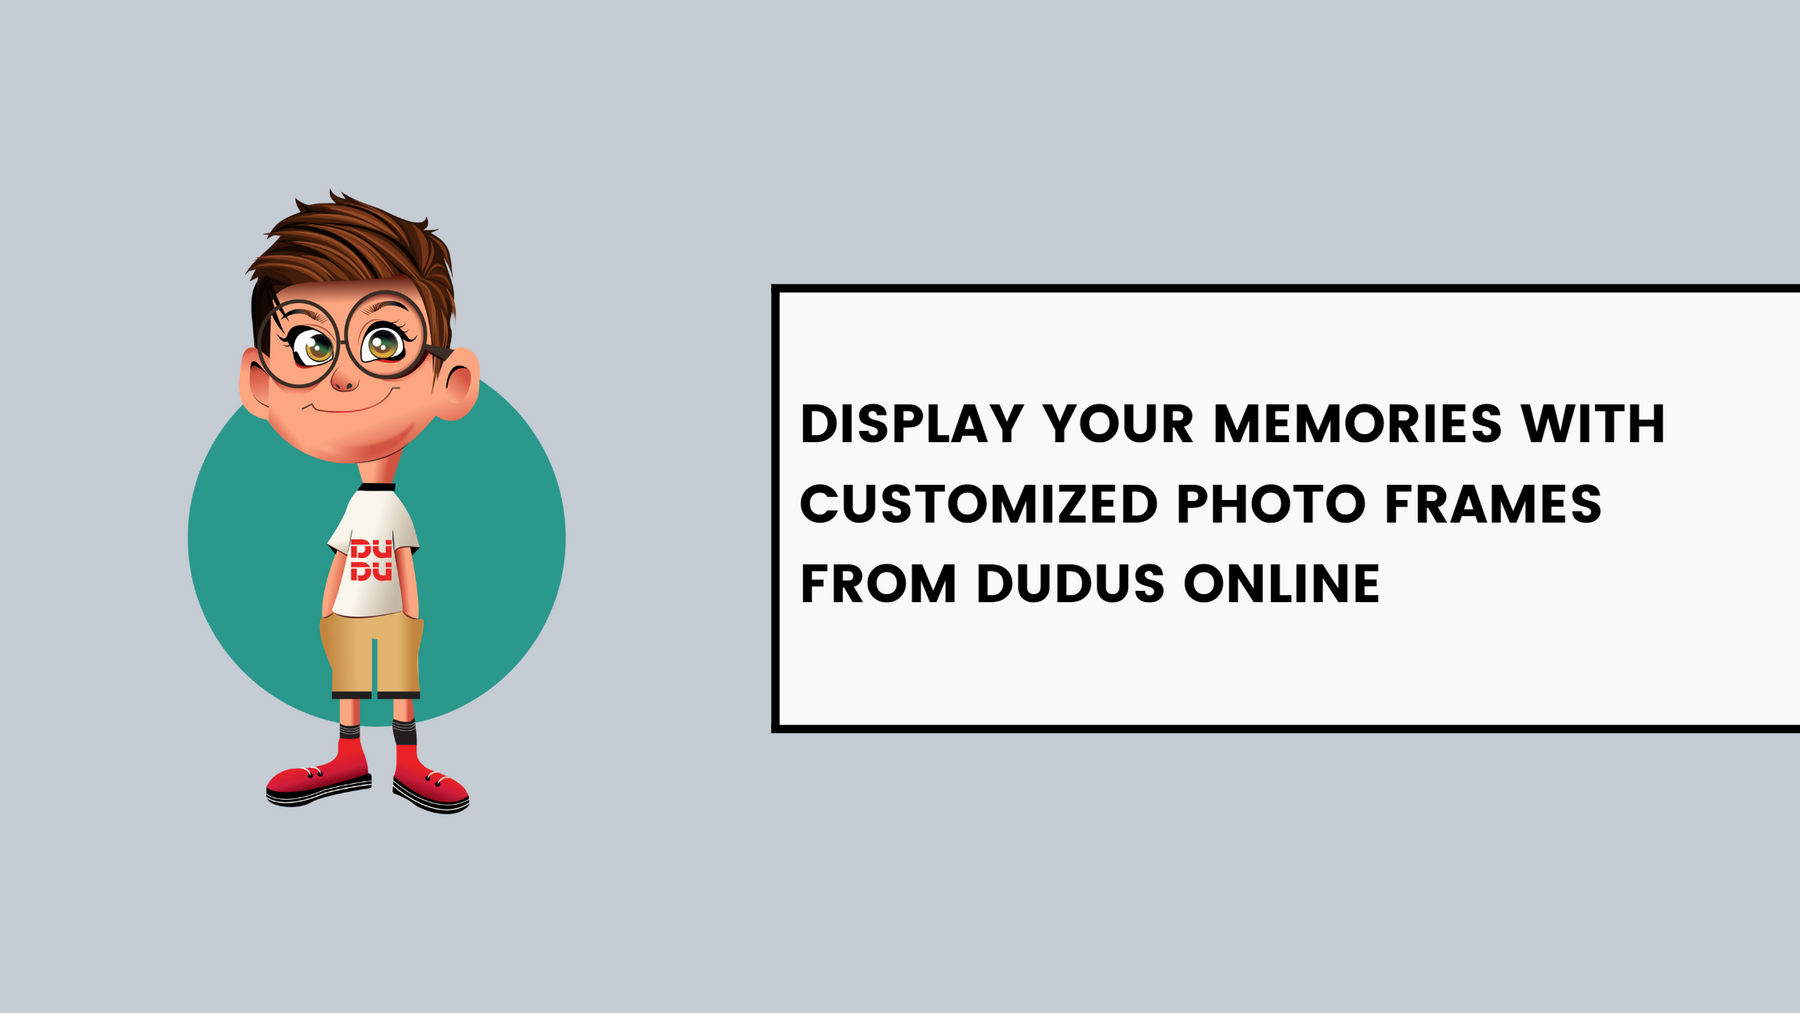 Display Your Memories With Customized Photo Frames From Dudus Online